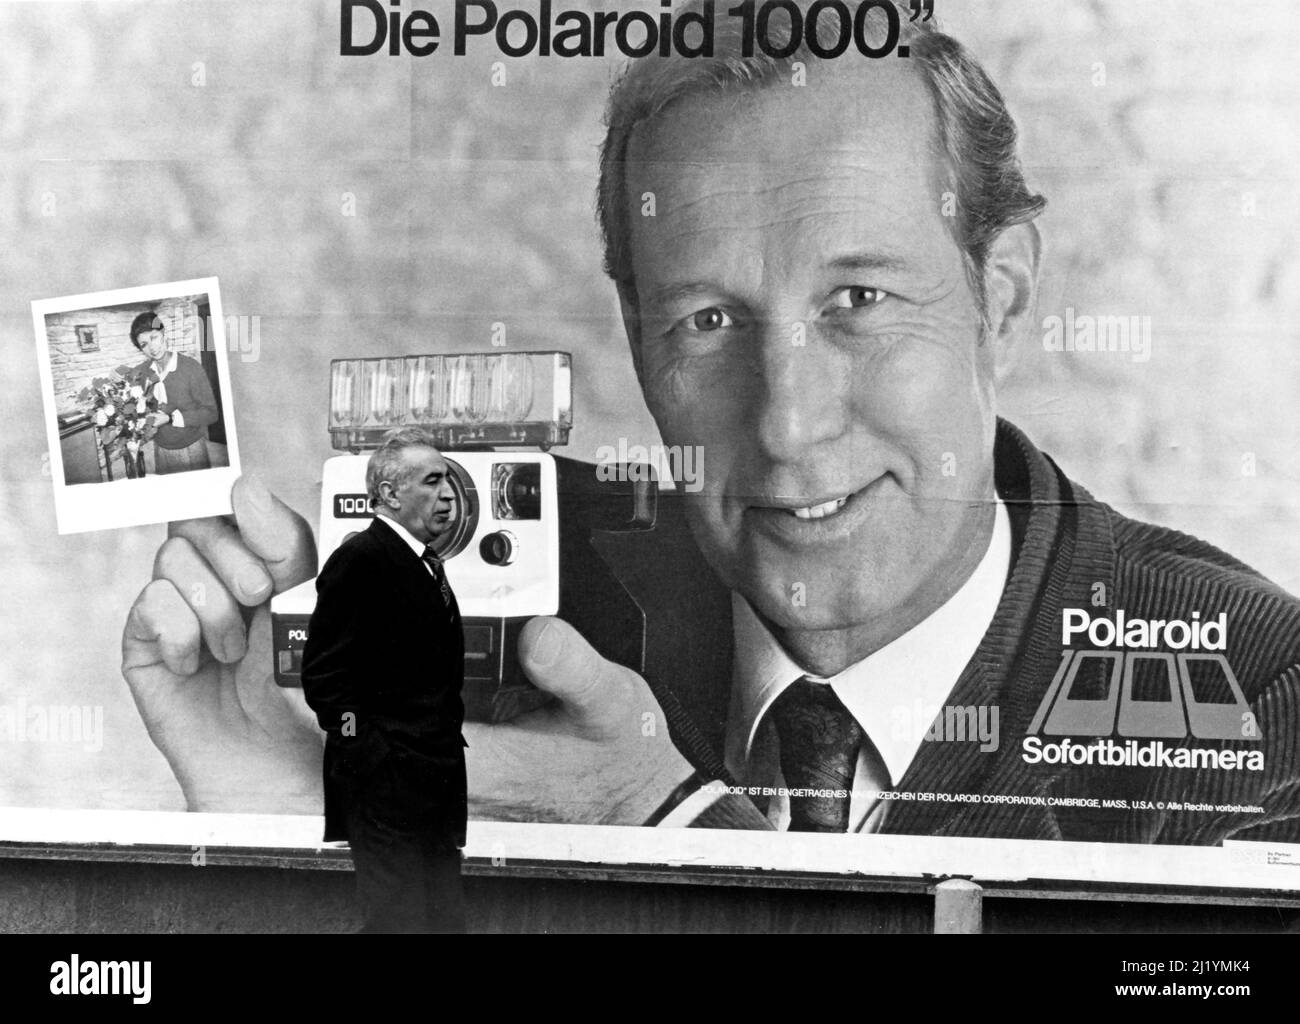 Outdoor advertising poster on street in Frankfurt, Germany for Polariod 1000 camera circa 1979 Stock Photo